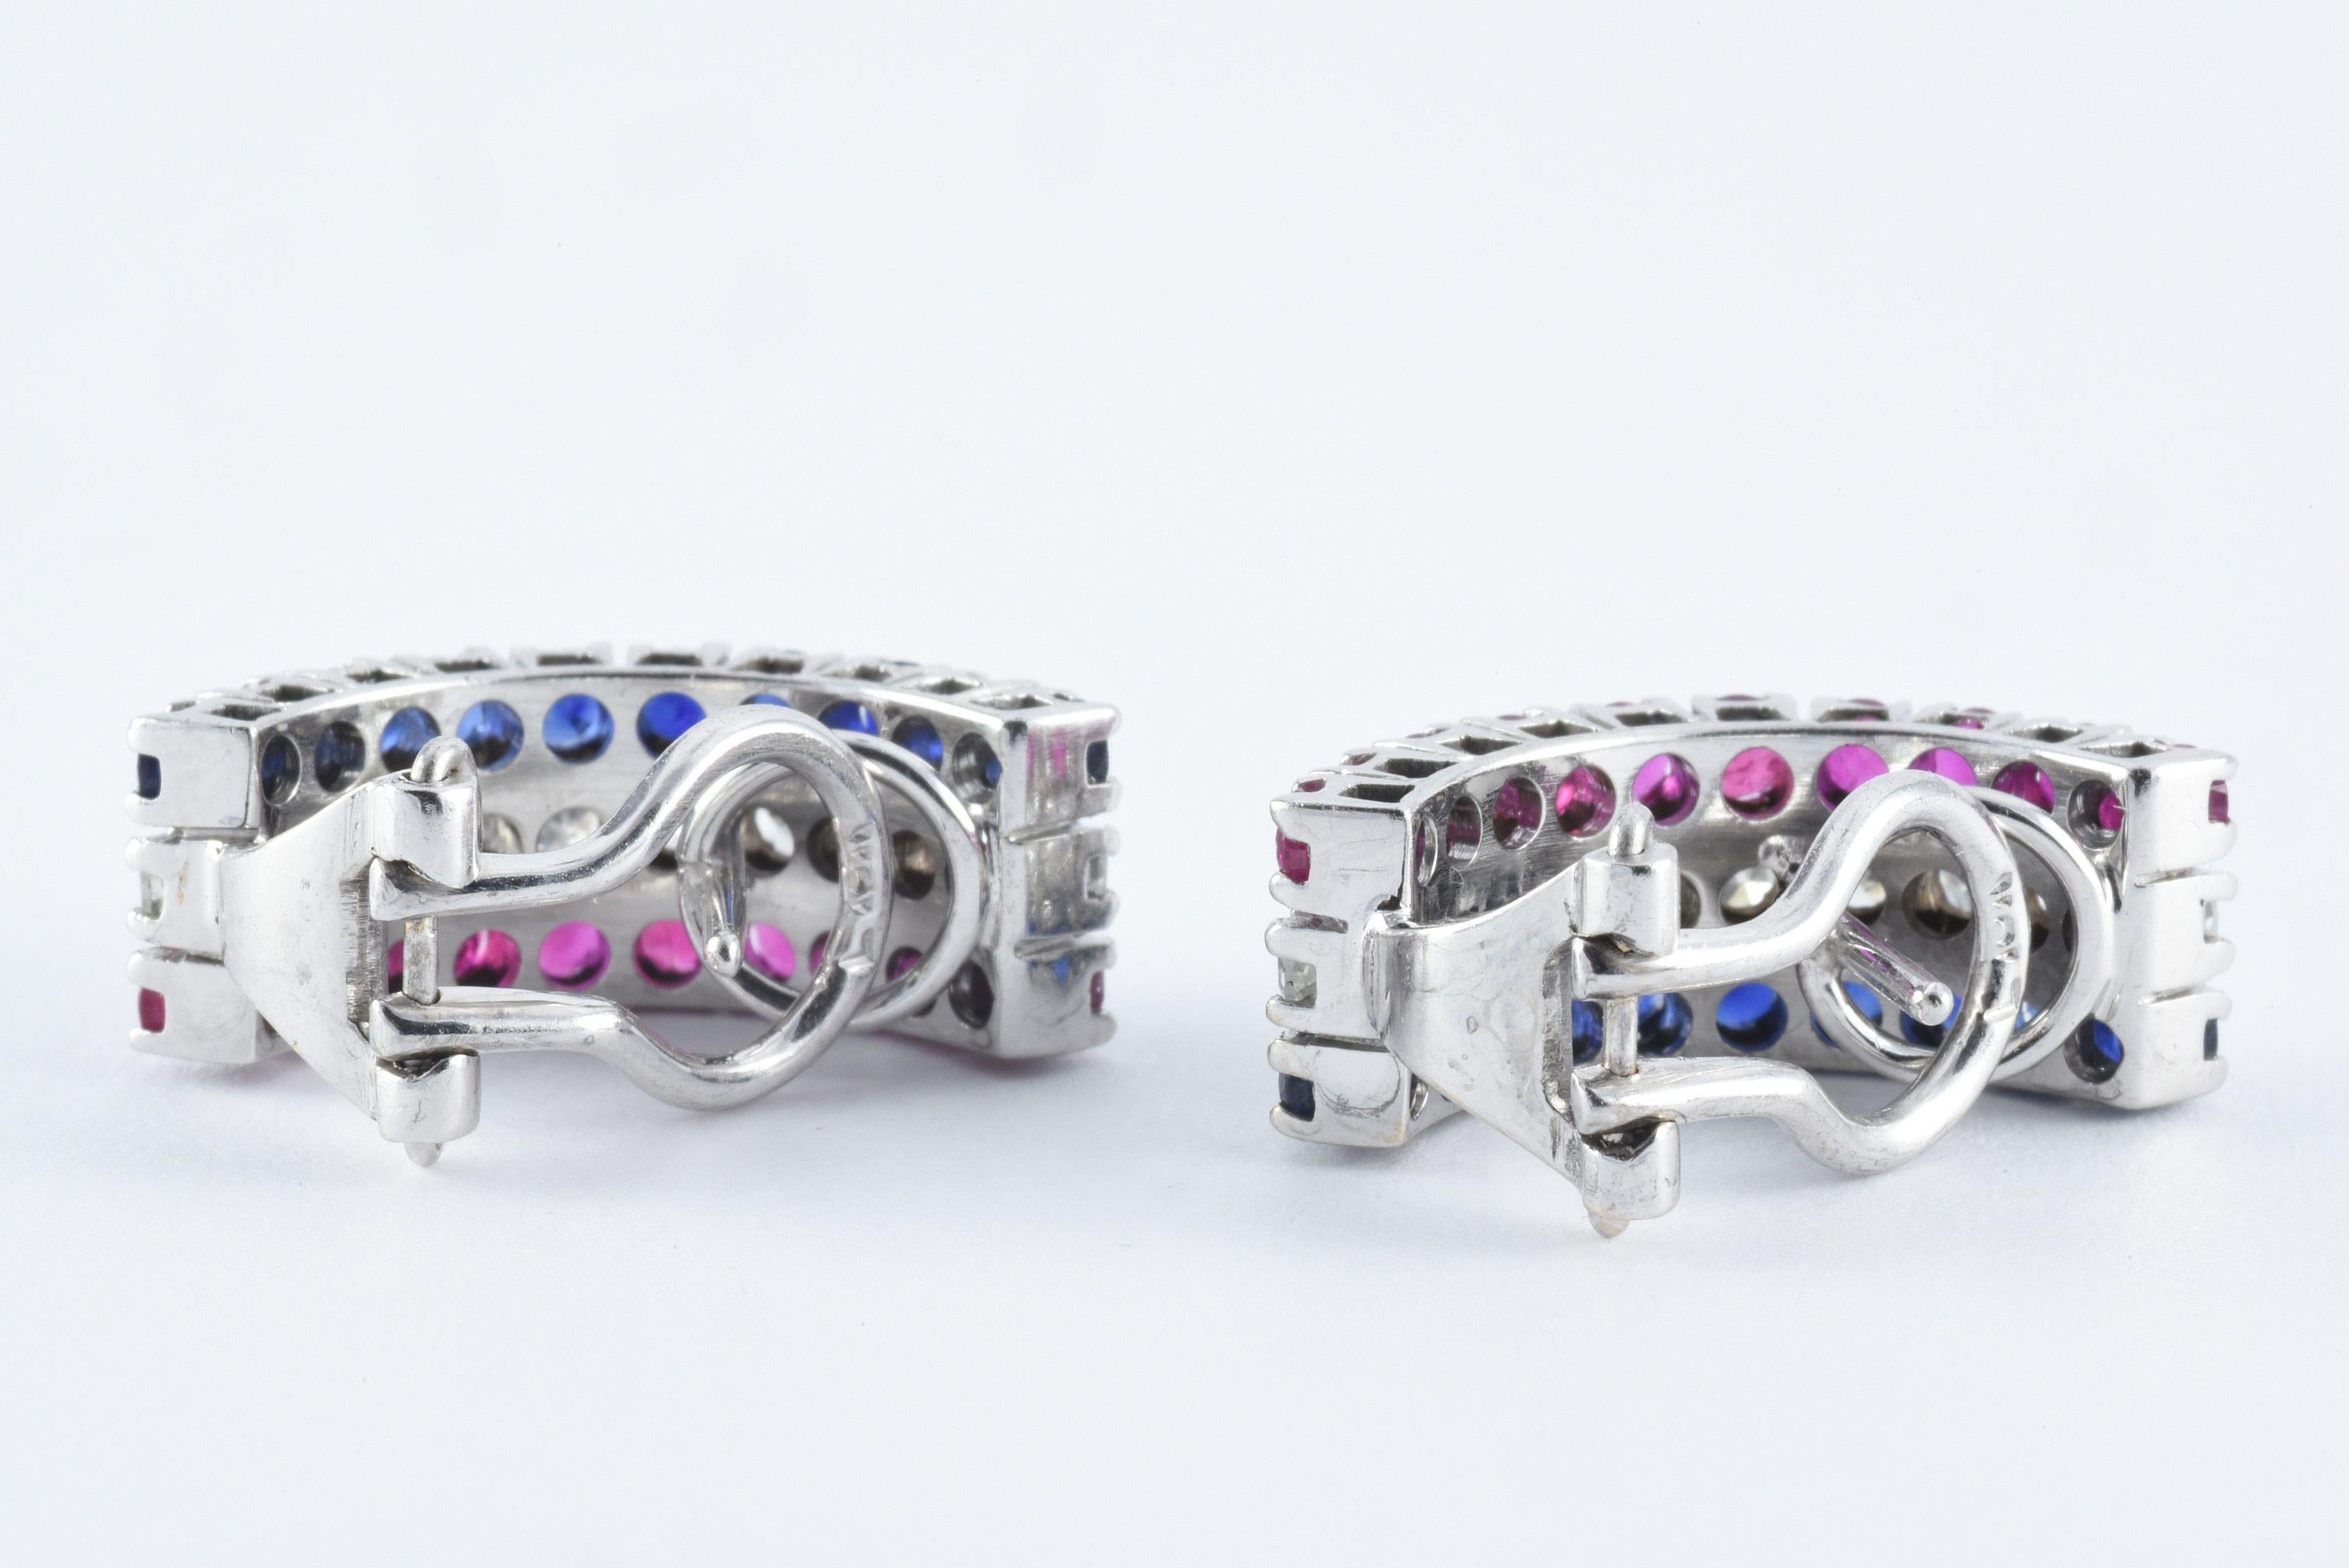 These beautiful huggie earrings made in France and reminiscent of the French flag feature three rows of stones. Each earring is set with ten single cut diamonds totaling approximately 0.50 carats in the middle, flanked on each side by ten round